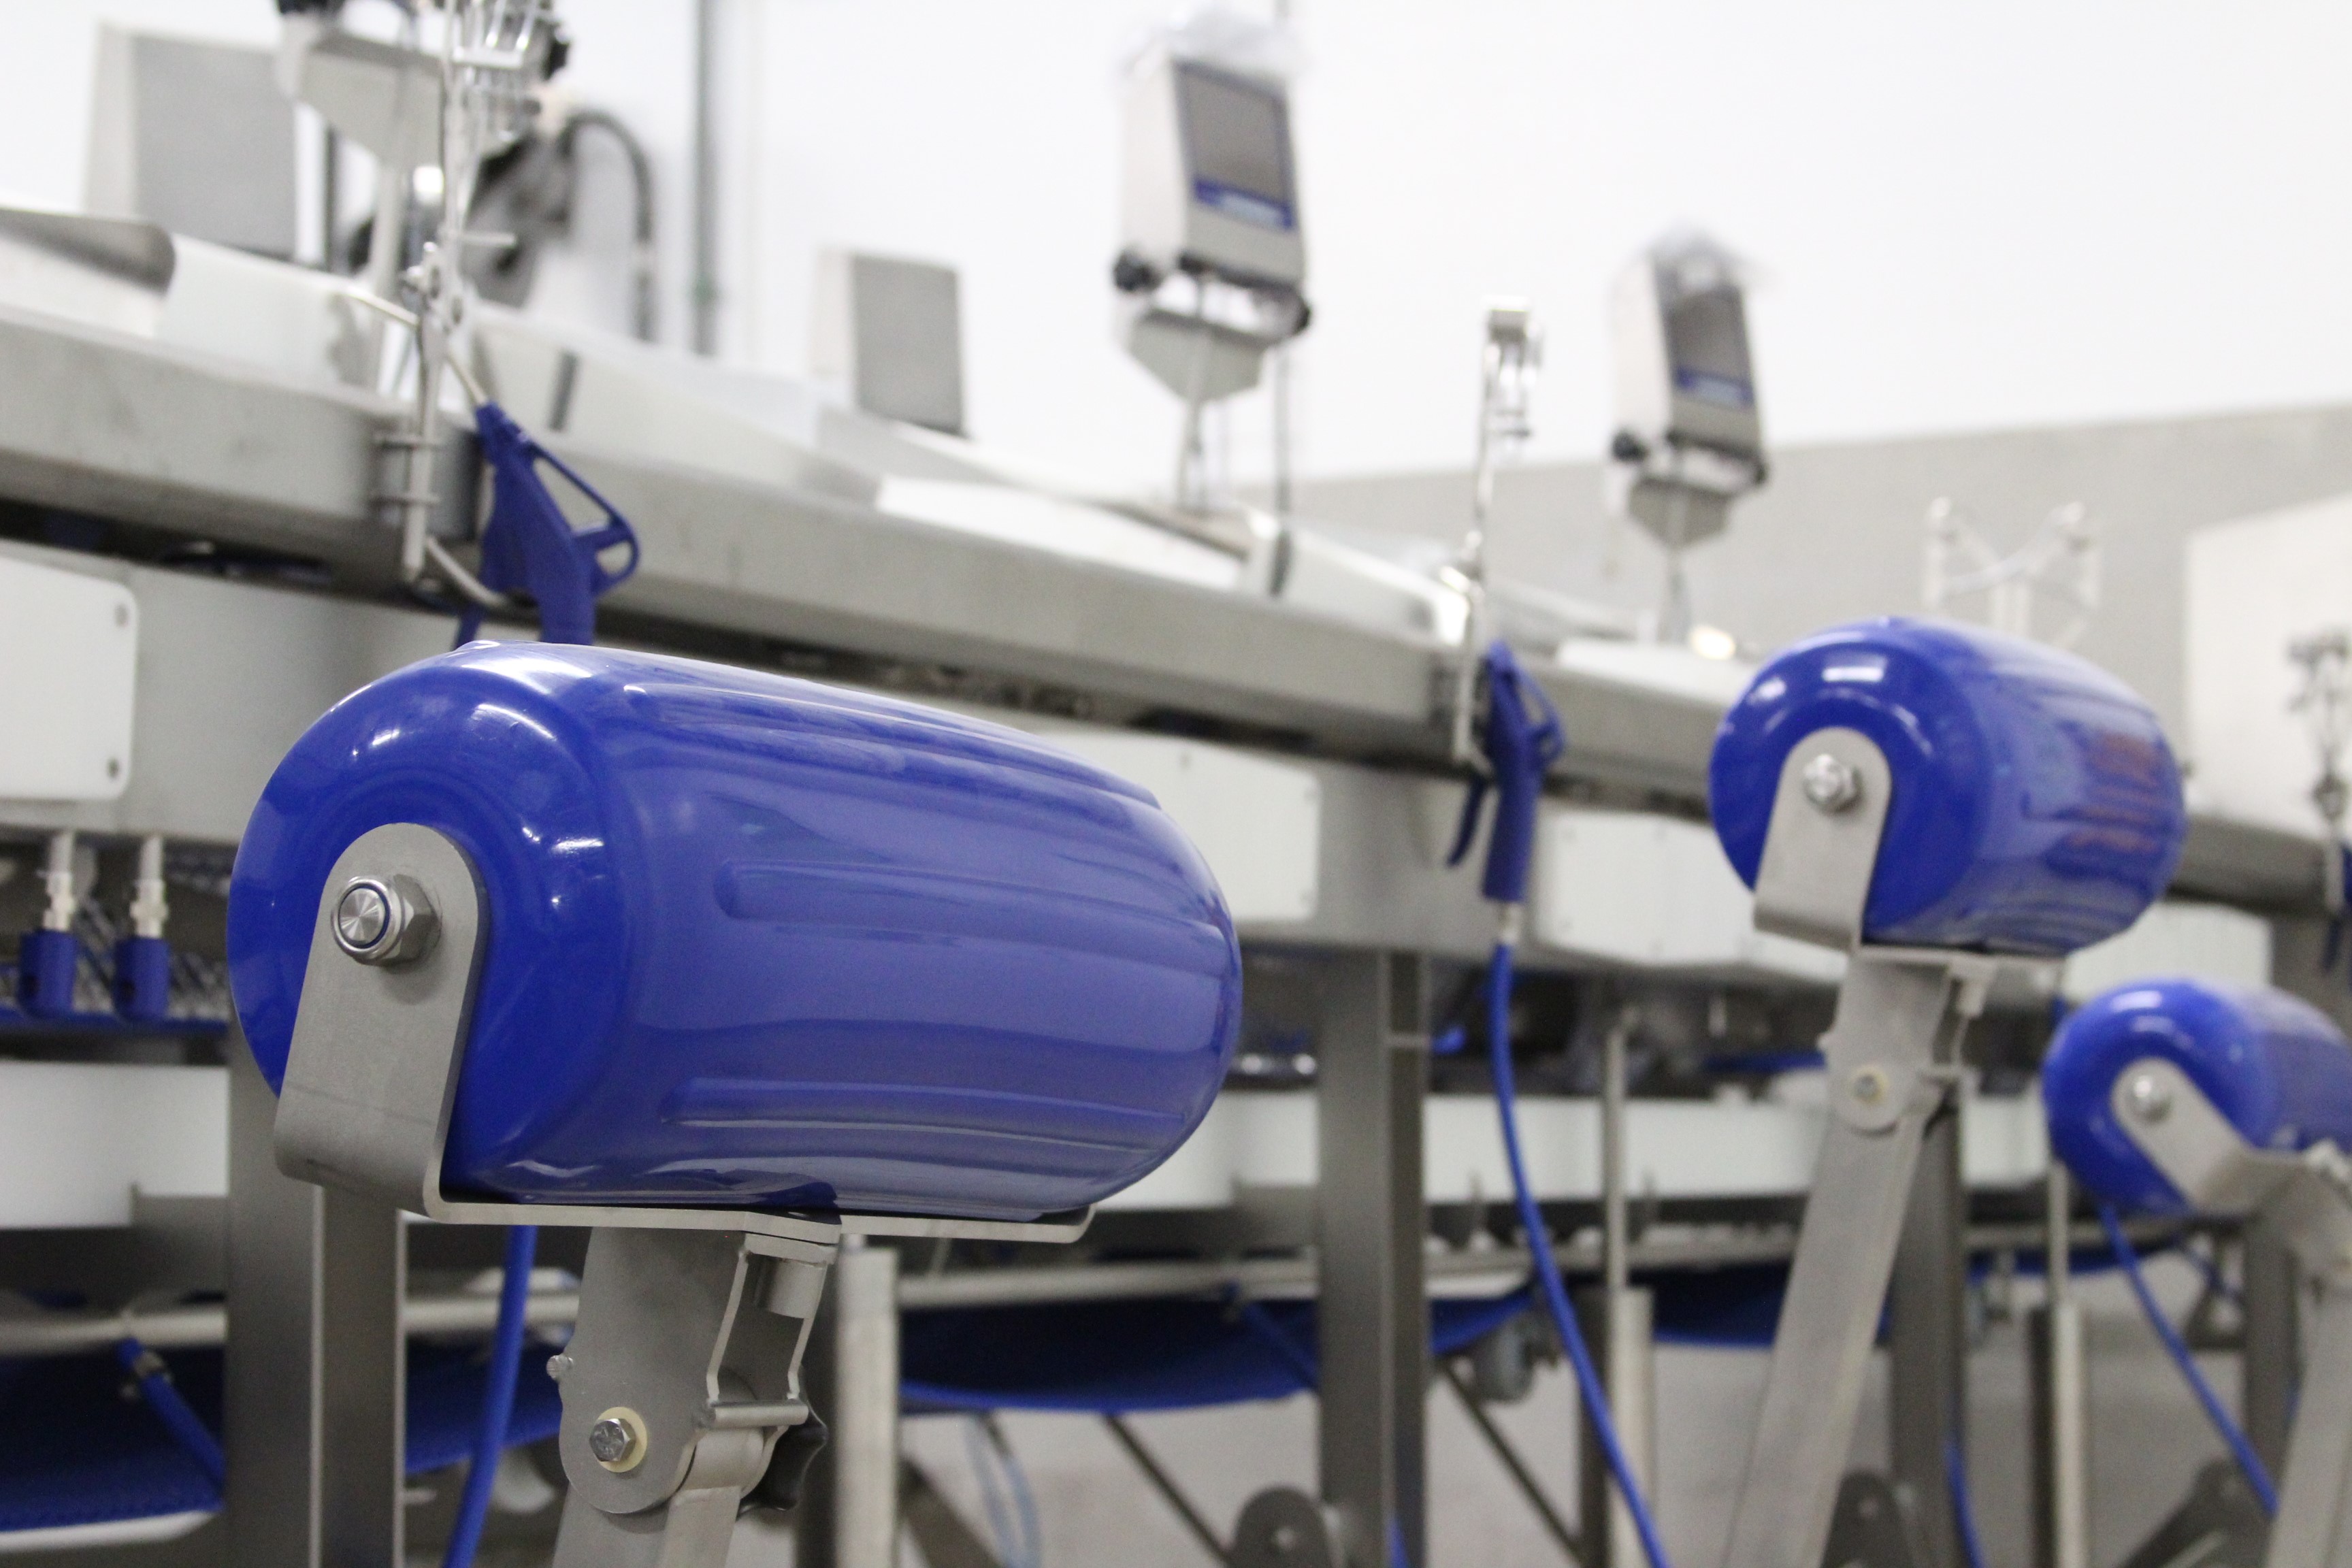 FISK Seafood invests in new production line from Marel